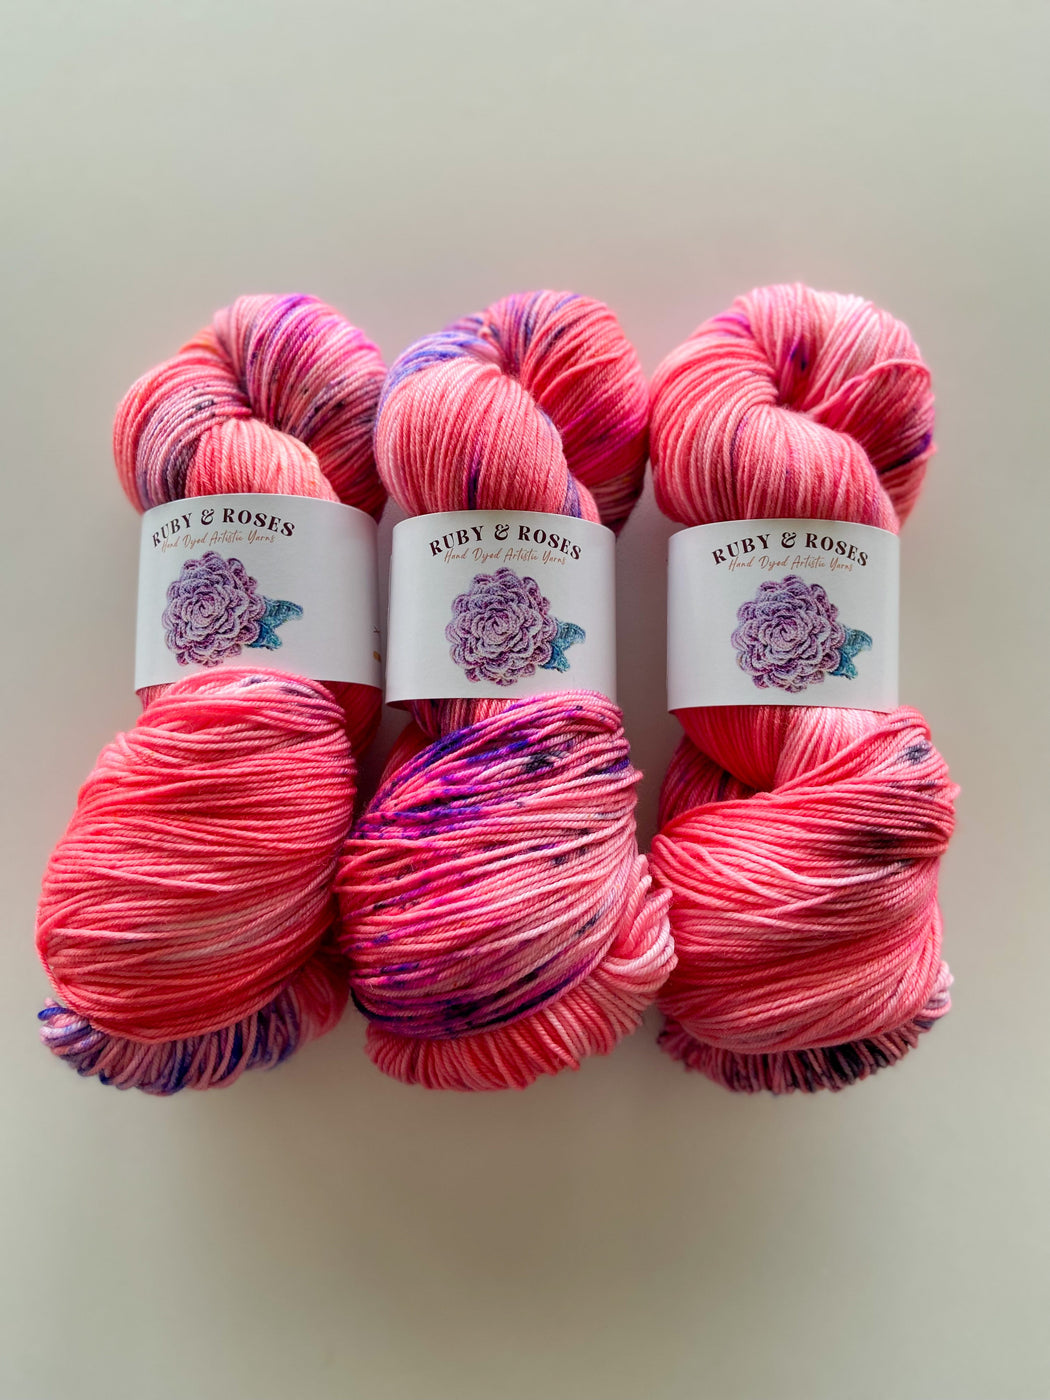 Misfit - OOAK - Ruby and Roses Yarn - Hand Dyed Yarn